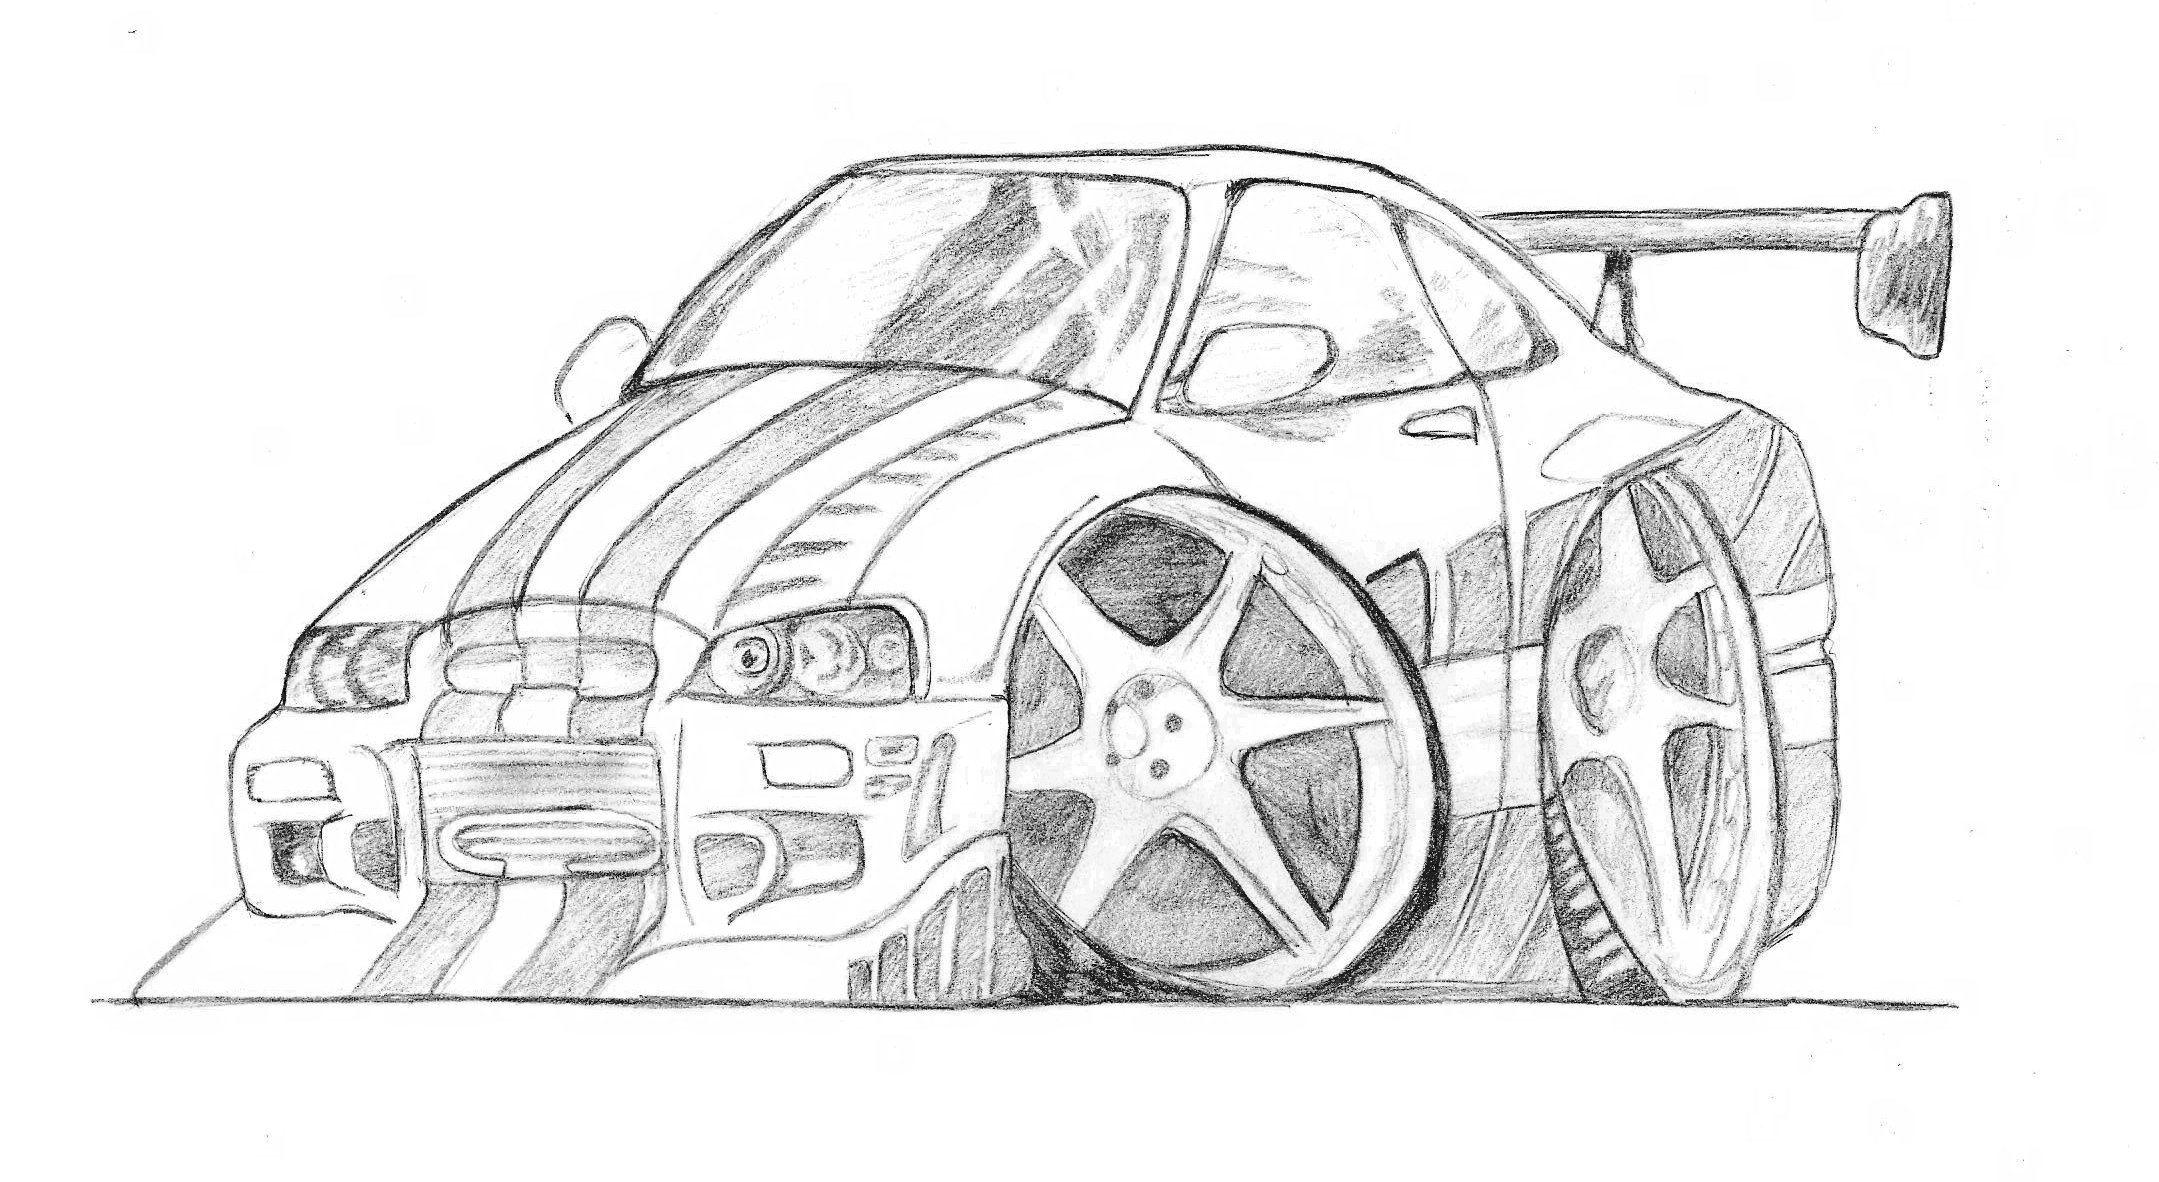 How To Draw A Car? - Step by Step Drawing Guide for Kids